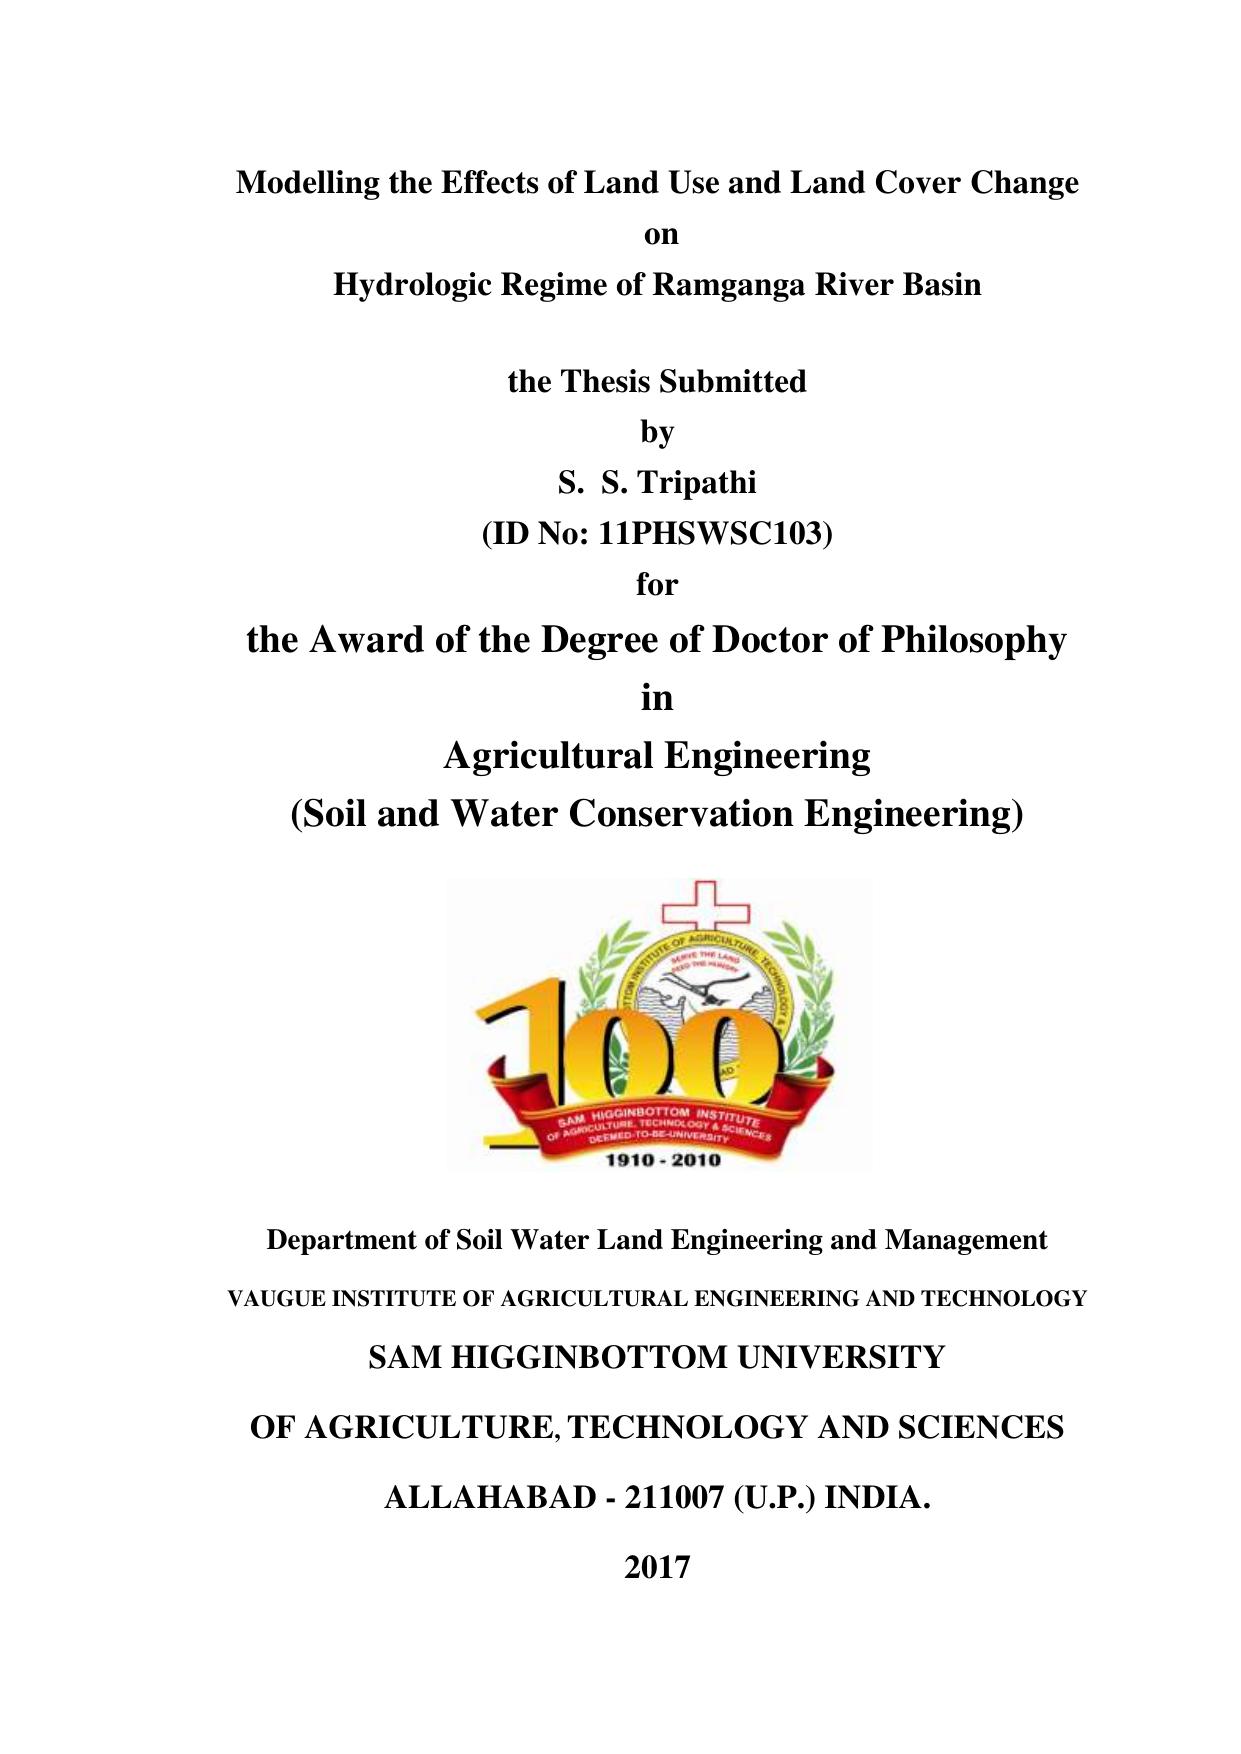 Soil and Water Conservation Engineering ( PDFDrive ) (2), 2017